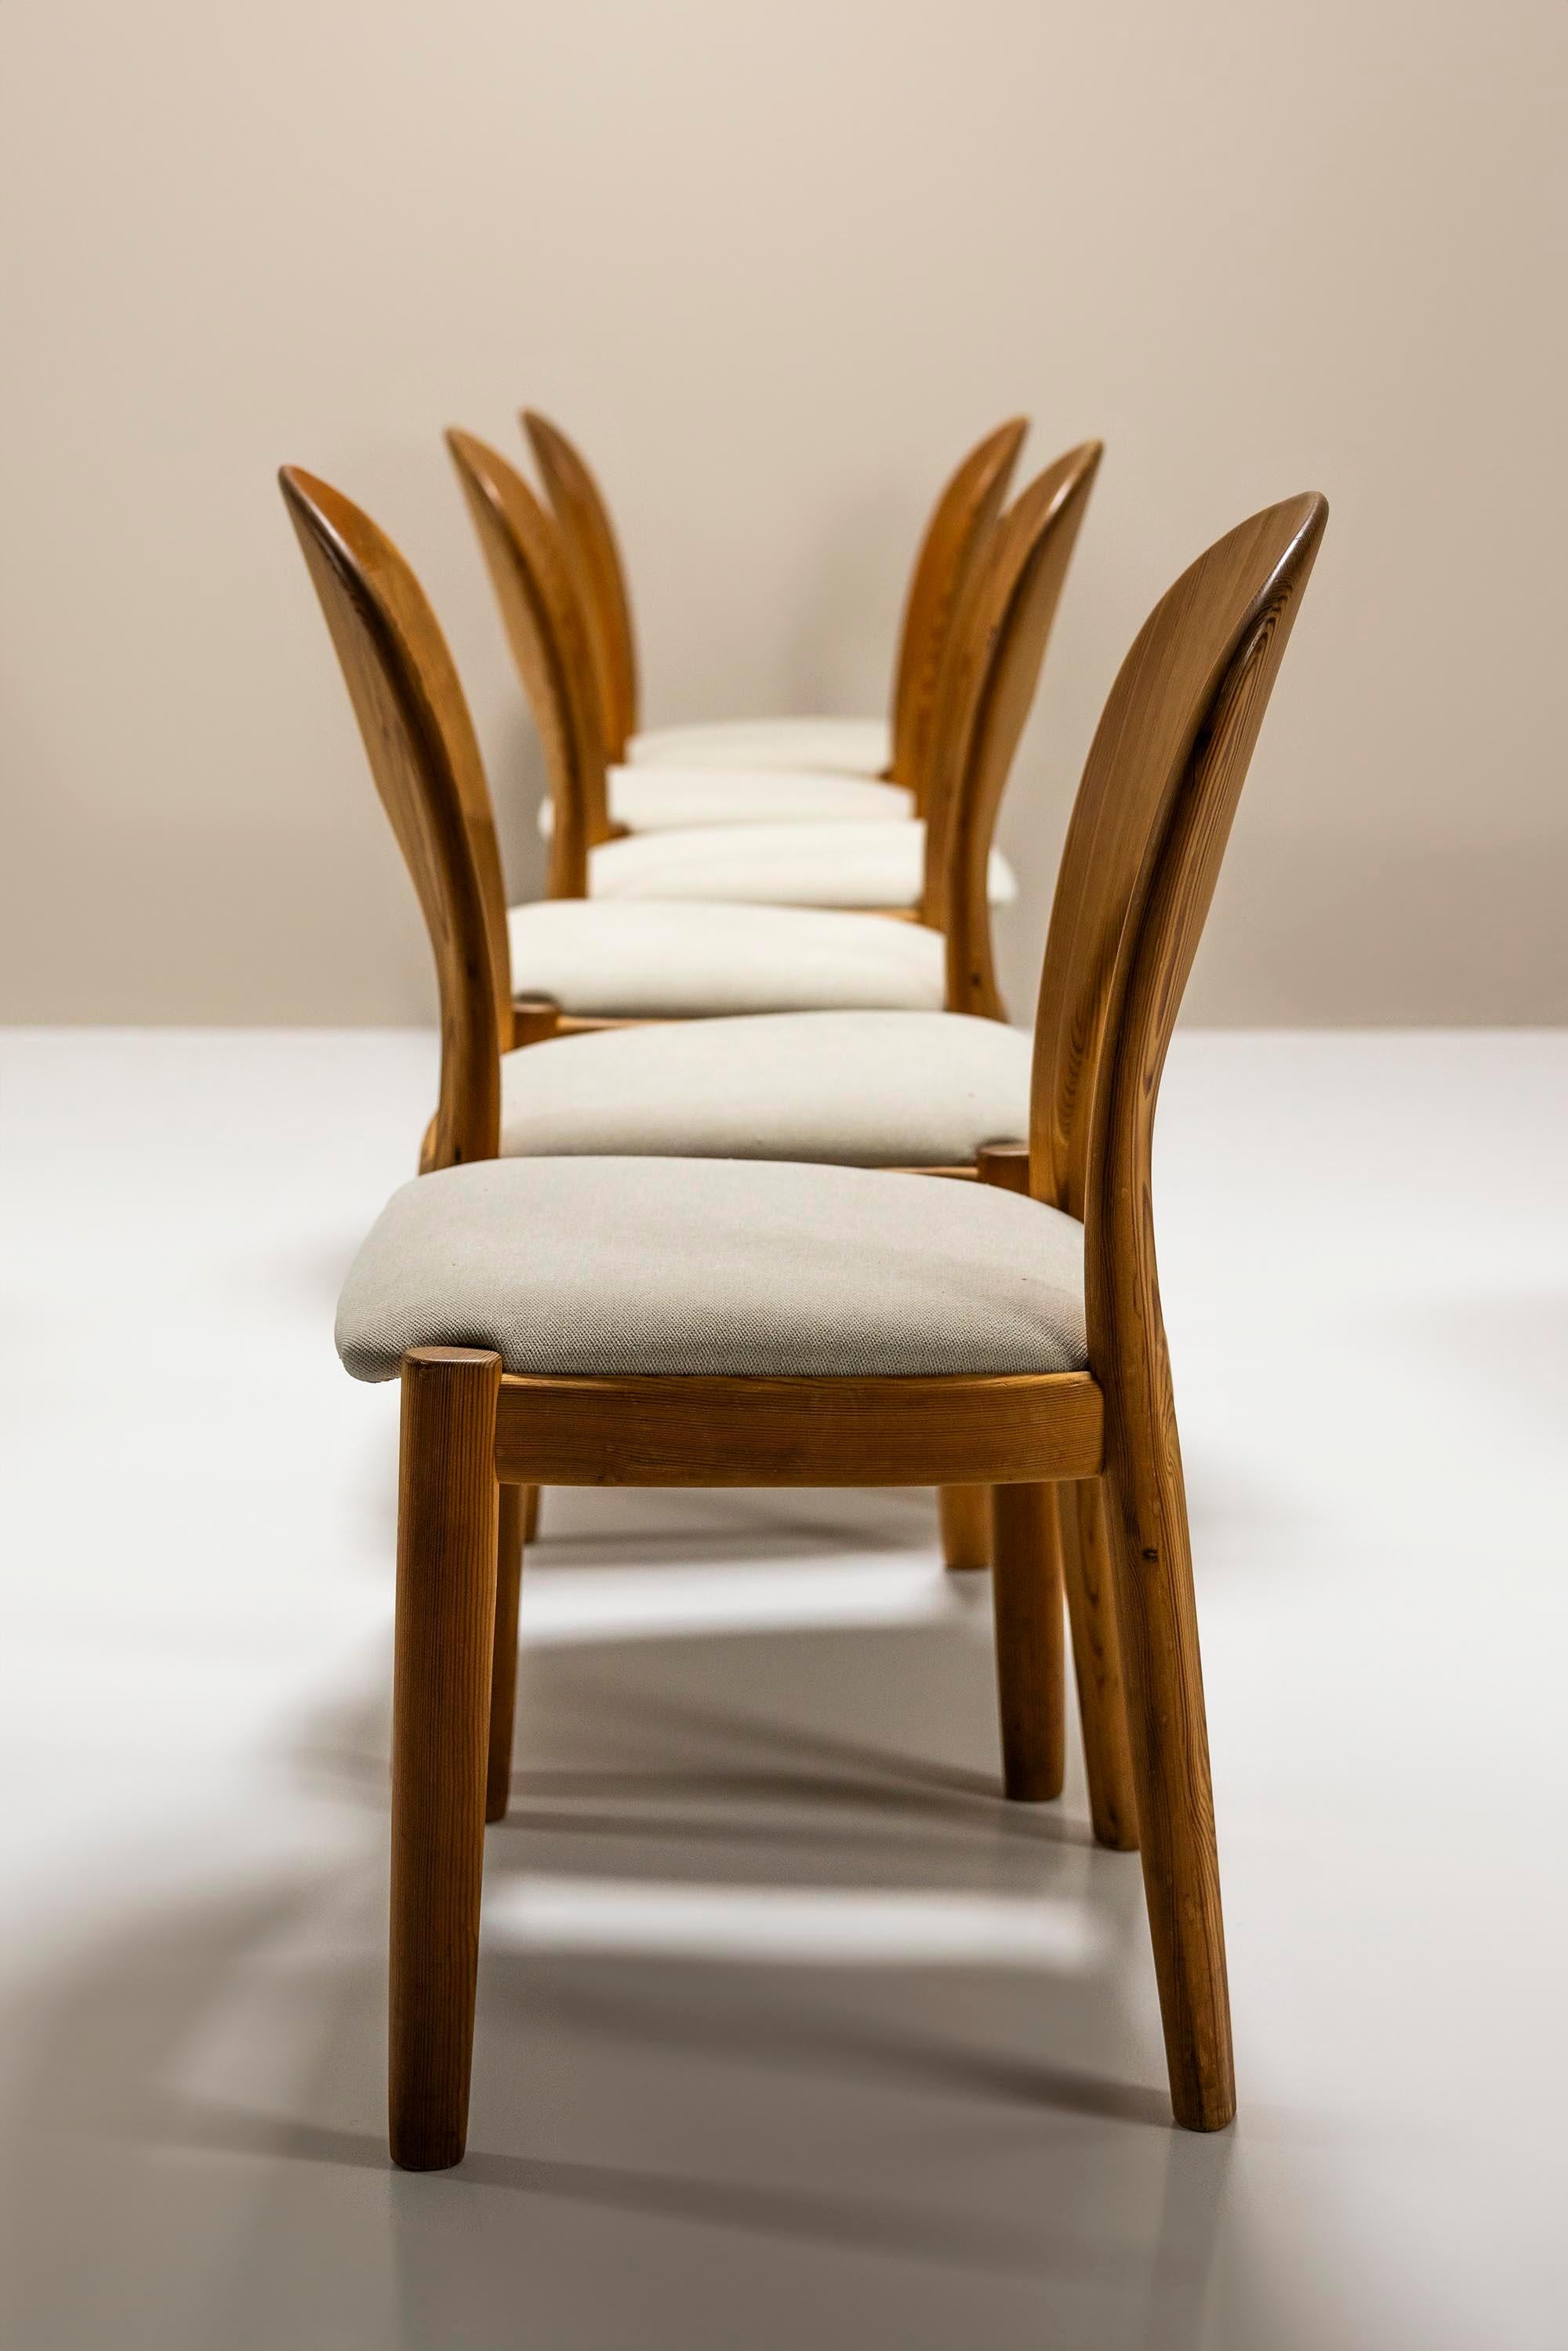 Mid-20th Century Set of Six 'Morten' Dining Chairs In Teak By Niels Kofoed, Denmark 1960s